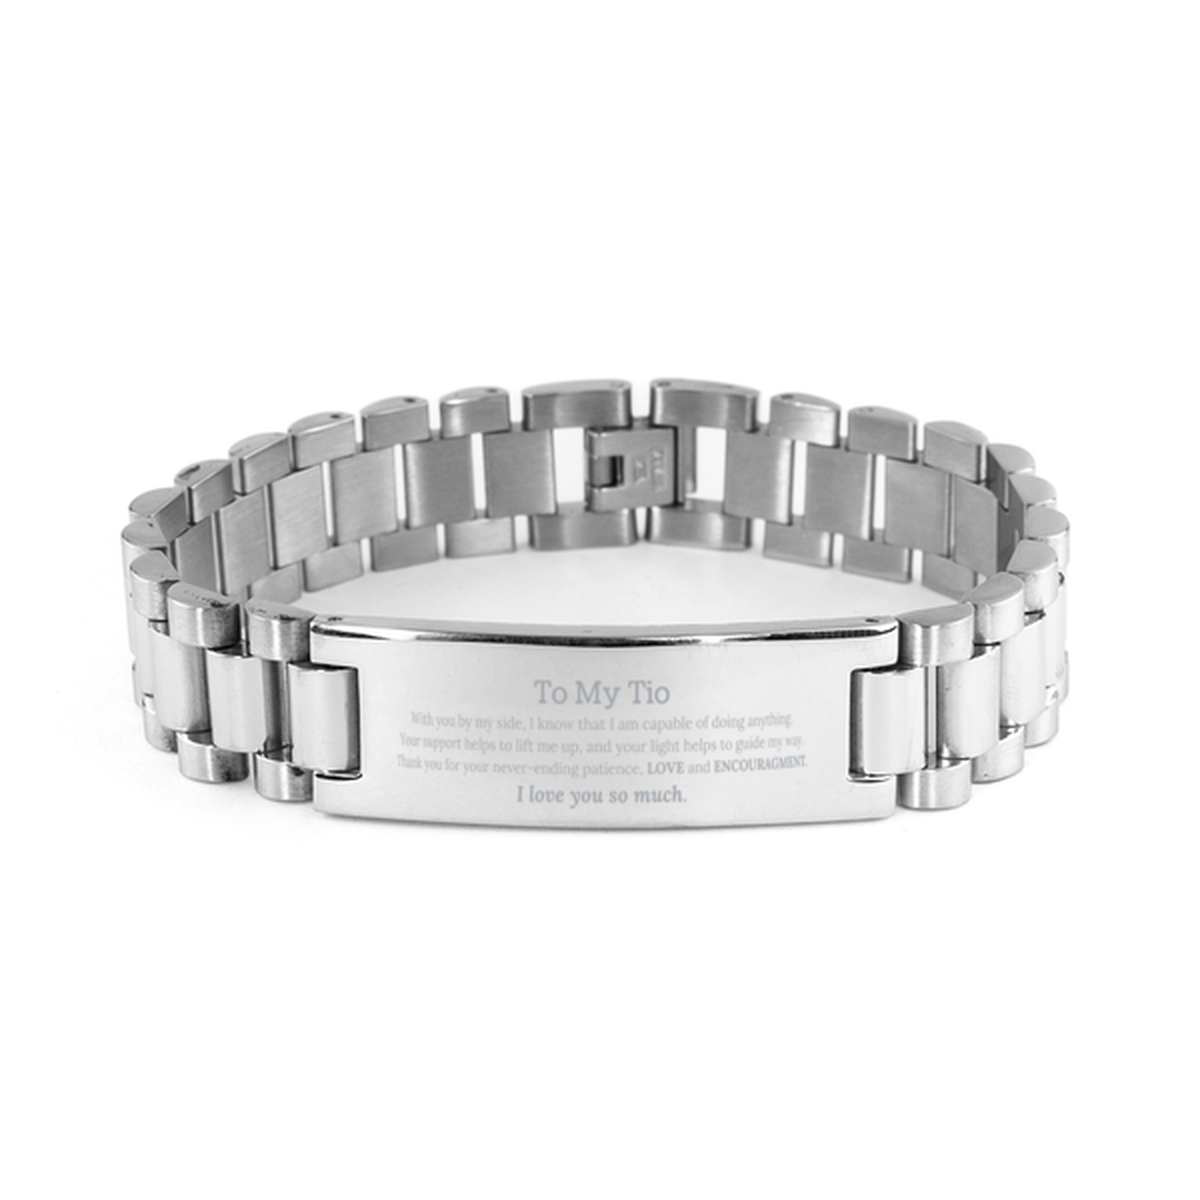 Appreciation Tio Ladder Stainless Steel Bracelet Gifts, To My Tio Birthday Christmas Wedding Keepsake Gifts for Tio With you by my side, I know that I am capable of doing anything. I love you so much